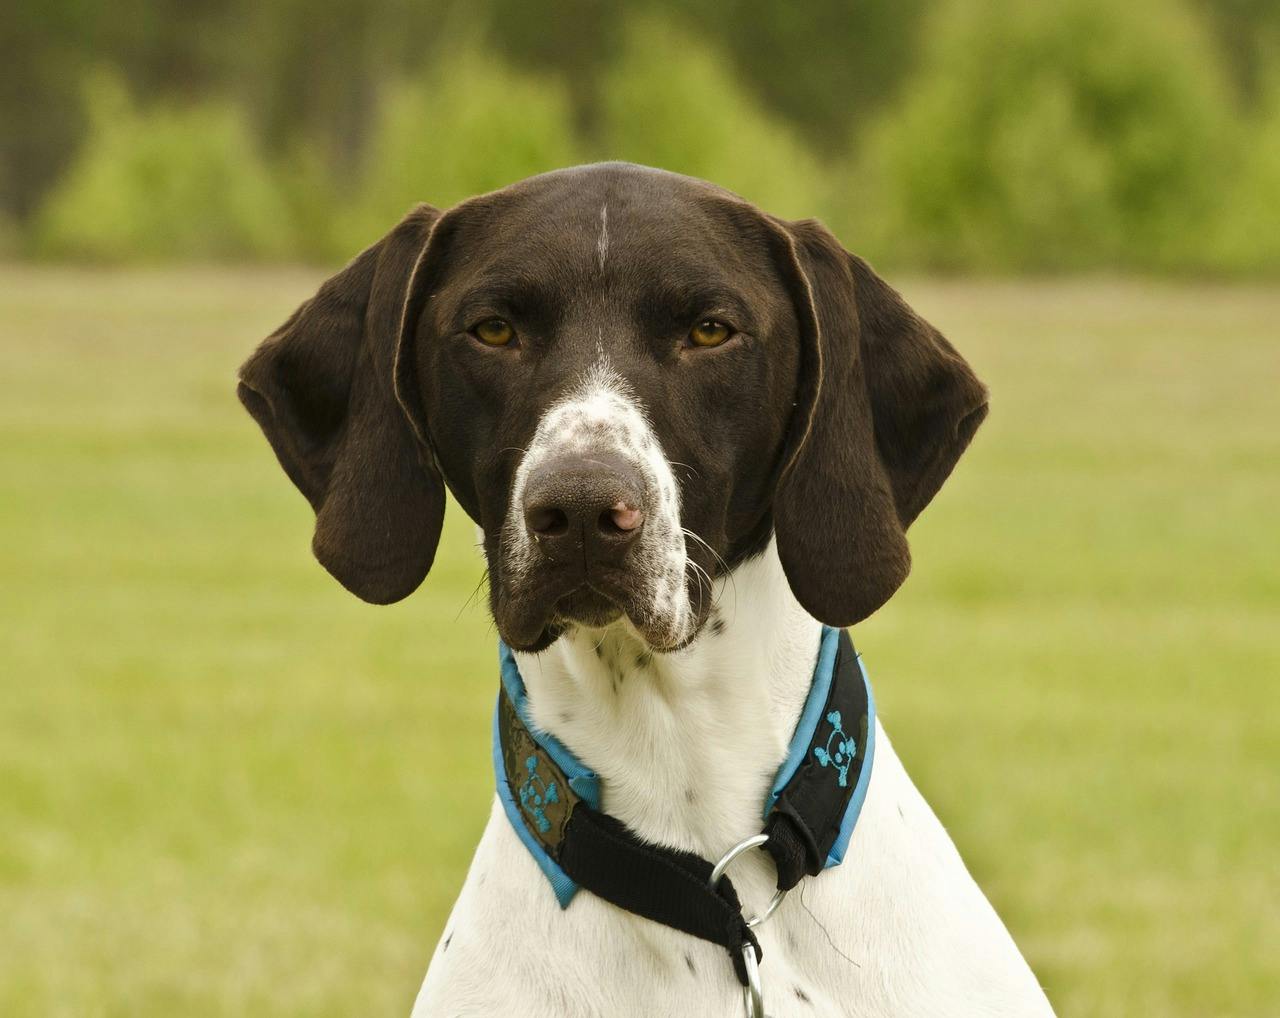 German Shorthaired Pointer sitting outside.